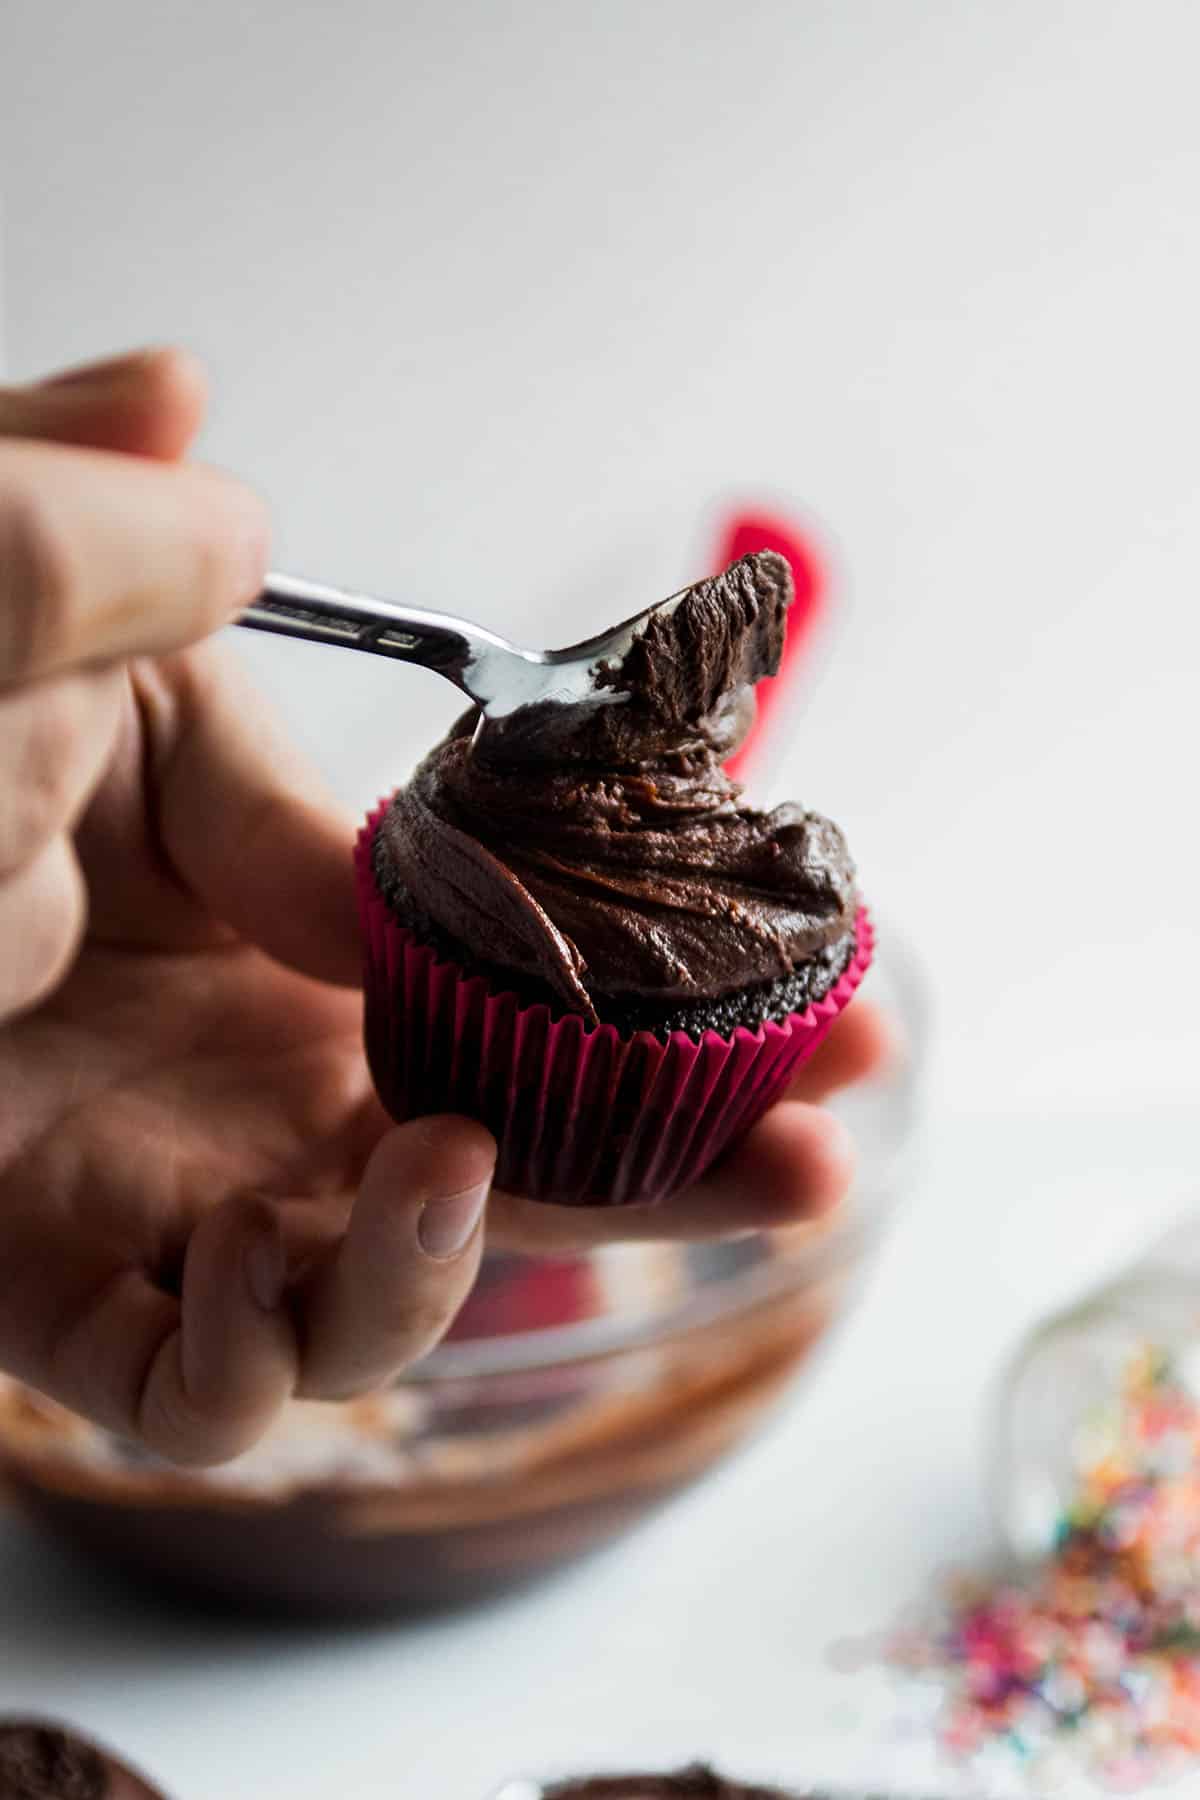 Hands using a small spoon to spread frosting over a cupcake.